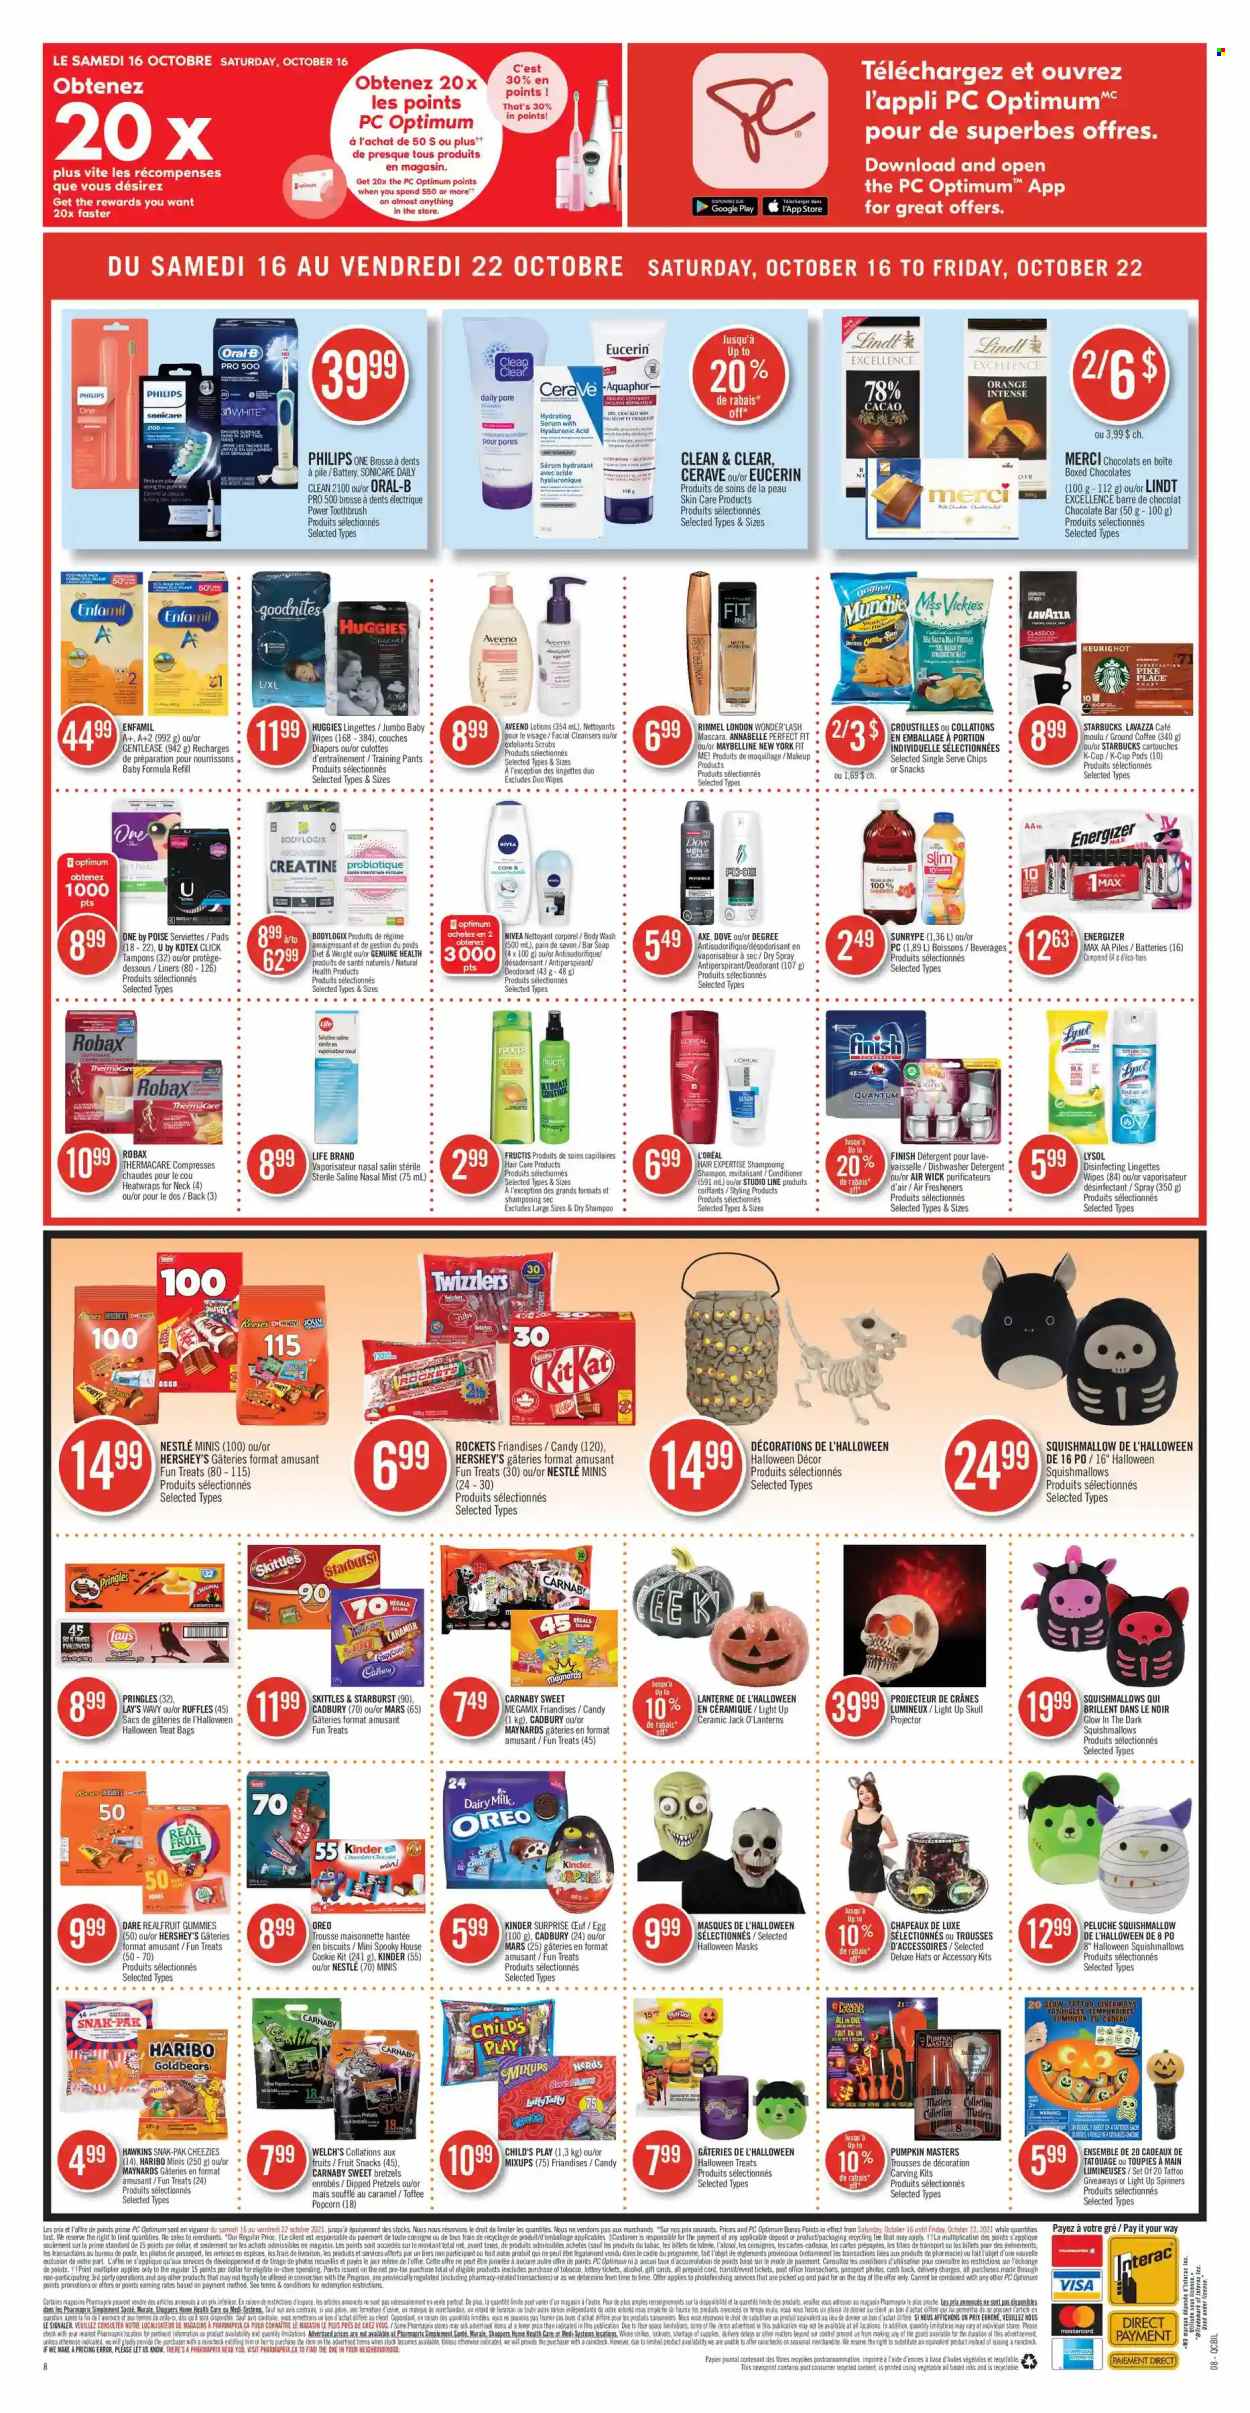 thumbnail - Pharmaprix Flyer - October 16, 2021 - October 22, 2021 - Sales products - Philips, pretzels, buns, pumpkin, Welch's, eggs, Reese's, Hershey's, Haribo, Kinder Surprise, Mars, toffee, biscuit, Cadbury, Merci, Dairy Milk, Skittles, fruit snack, Starburst, chocolate bar, Pringles, Lay’s, popcorn, Ruffles, caramel, Classico, vegetable oil, oil, coffee, ground coffee, coffee capsules, Starbucks, K-Cups, Lavazza, alcohol, Enfamil, wipes, pants, baby wipes, nappies, baby pants, Aquaphor, Aveeno, Lysol, body wash, soap bar, soap, toothbrush, Kotex, tampons, CeraVe, L’Oréal, serum, Clean & Clear, conditioner, Fructis, anti-perspirant, makeup, mascara, Rimmel, pot, air freshener, Air Wick, battery, projector, Sonicare, Squishmallows, Halloween, Thermacare, Oreo, Nestlé, detergent, Dove, Energizer, Eucerin, Maybelline, shampoo, Huggies, Nivea, Oral-B, chips, Lindt, oranges, deodorant. Page 13.